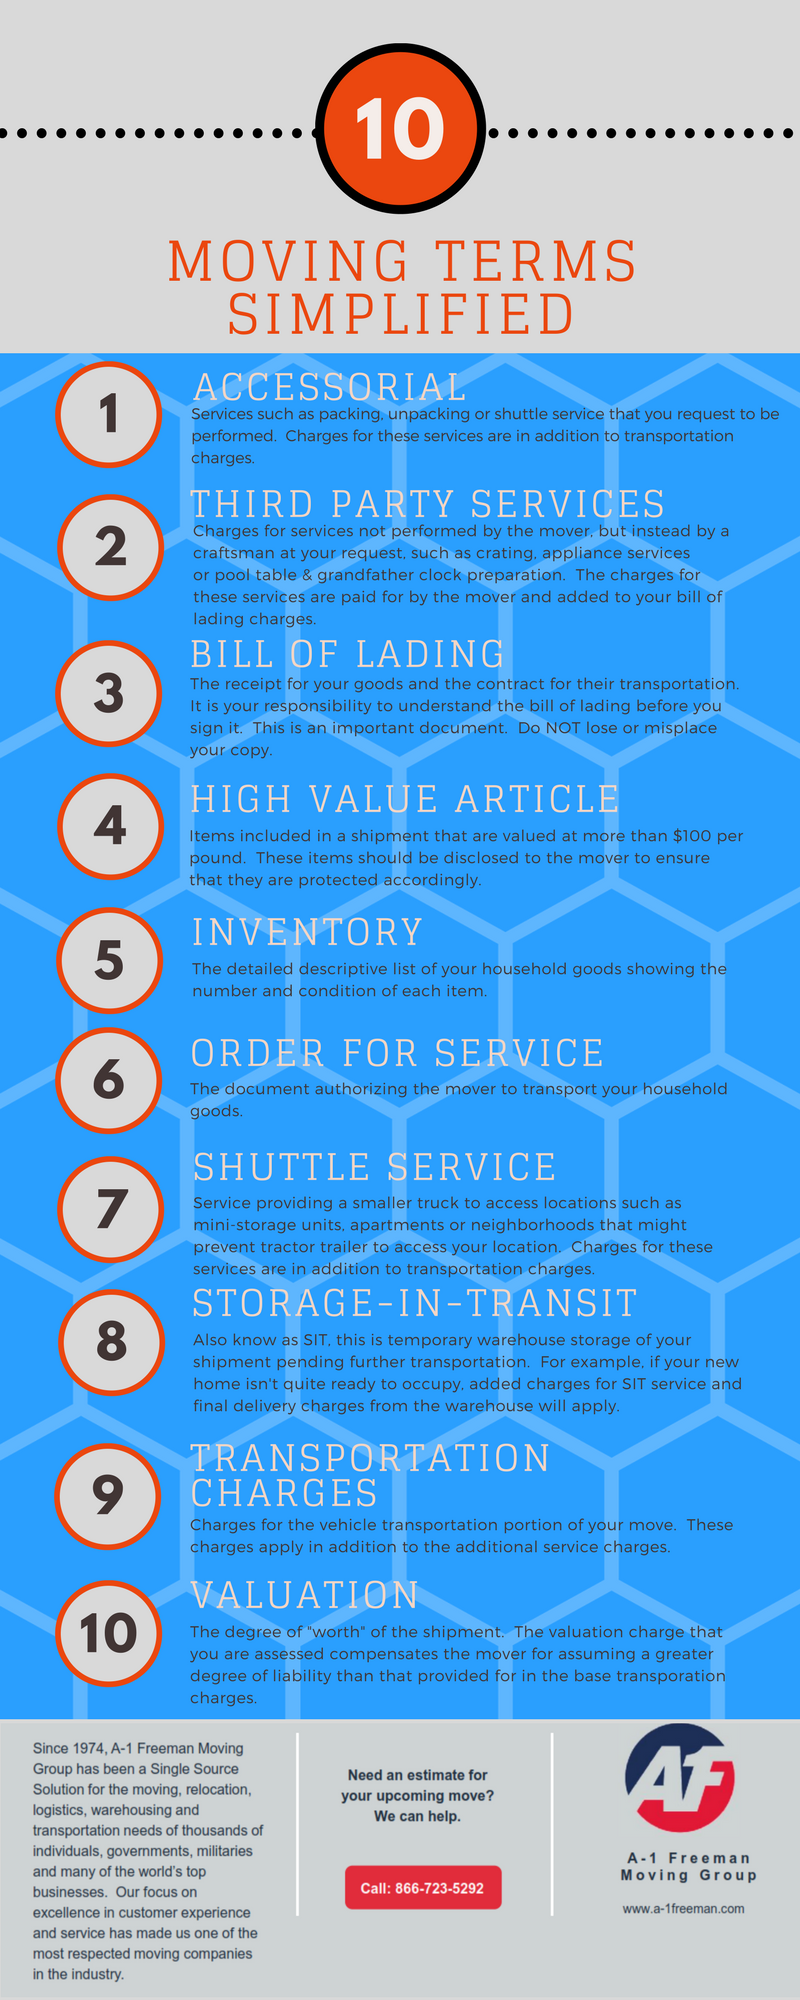 A-1 Freeman Moving Group Dallas Moving Terms Infographic